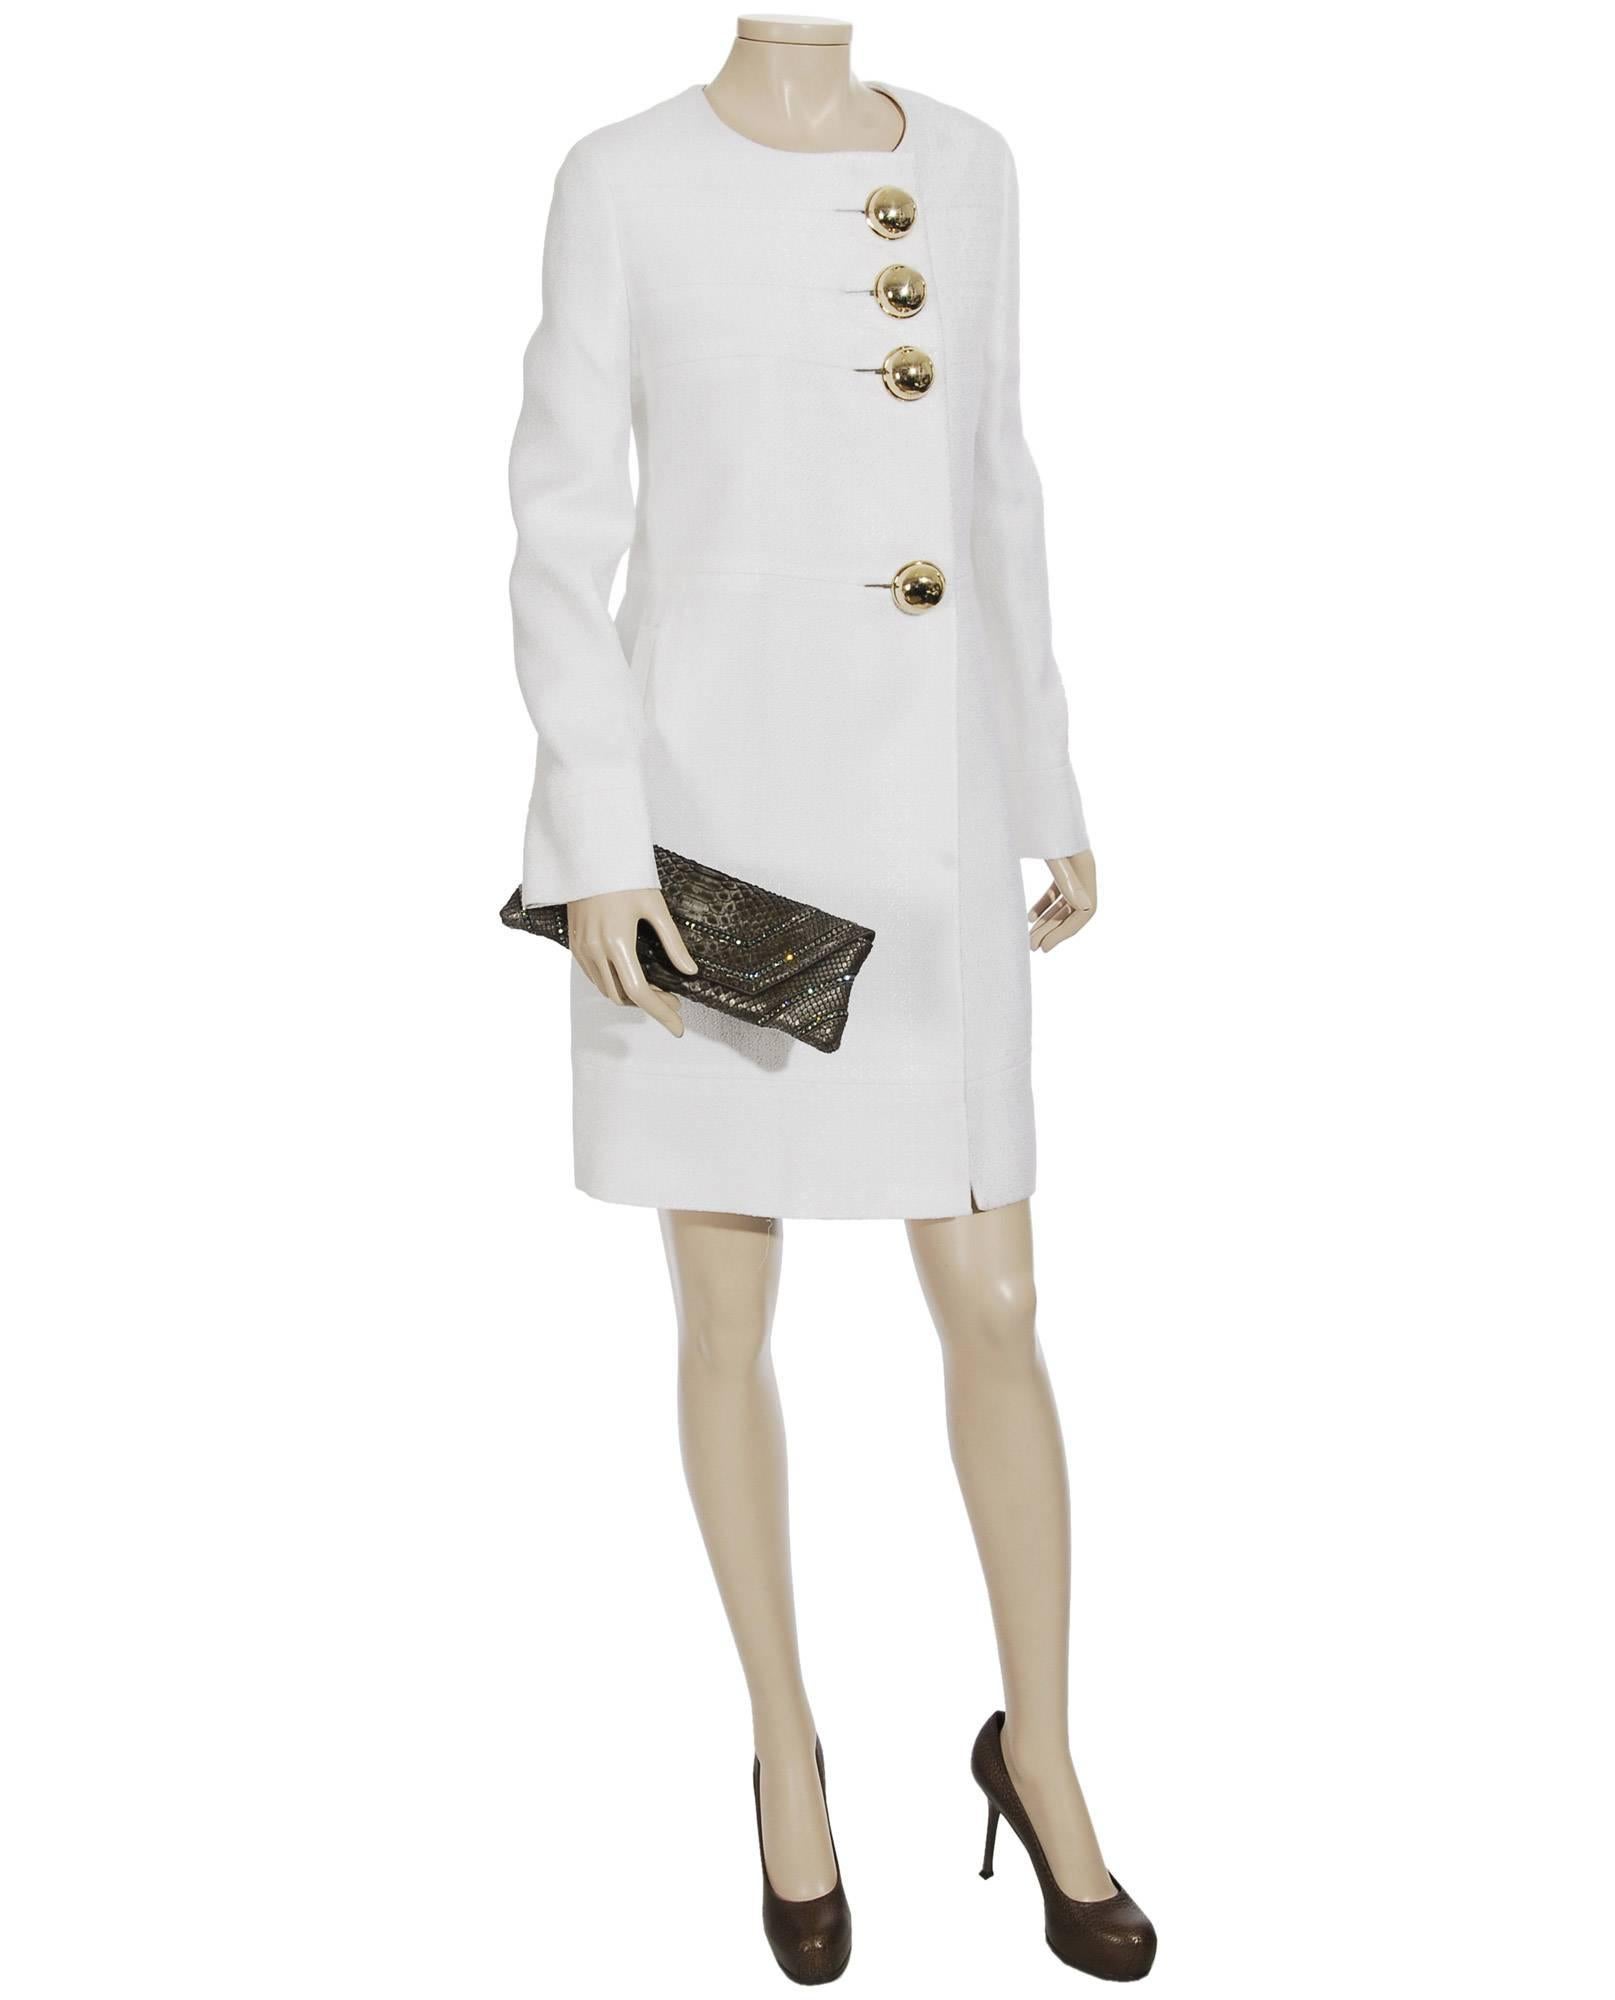  Stunning Versace Ivory Summer Coat With XL Button Detail

This beautiful coat is both an absolute IT-PIECE and timeless classic!

DETAILS: 

A great piece made by VERSACE
This gorgeous coat is made out of fine ivory fabric
Golden XL buttons